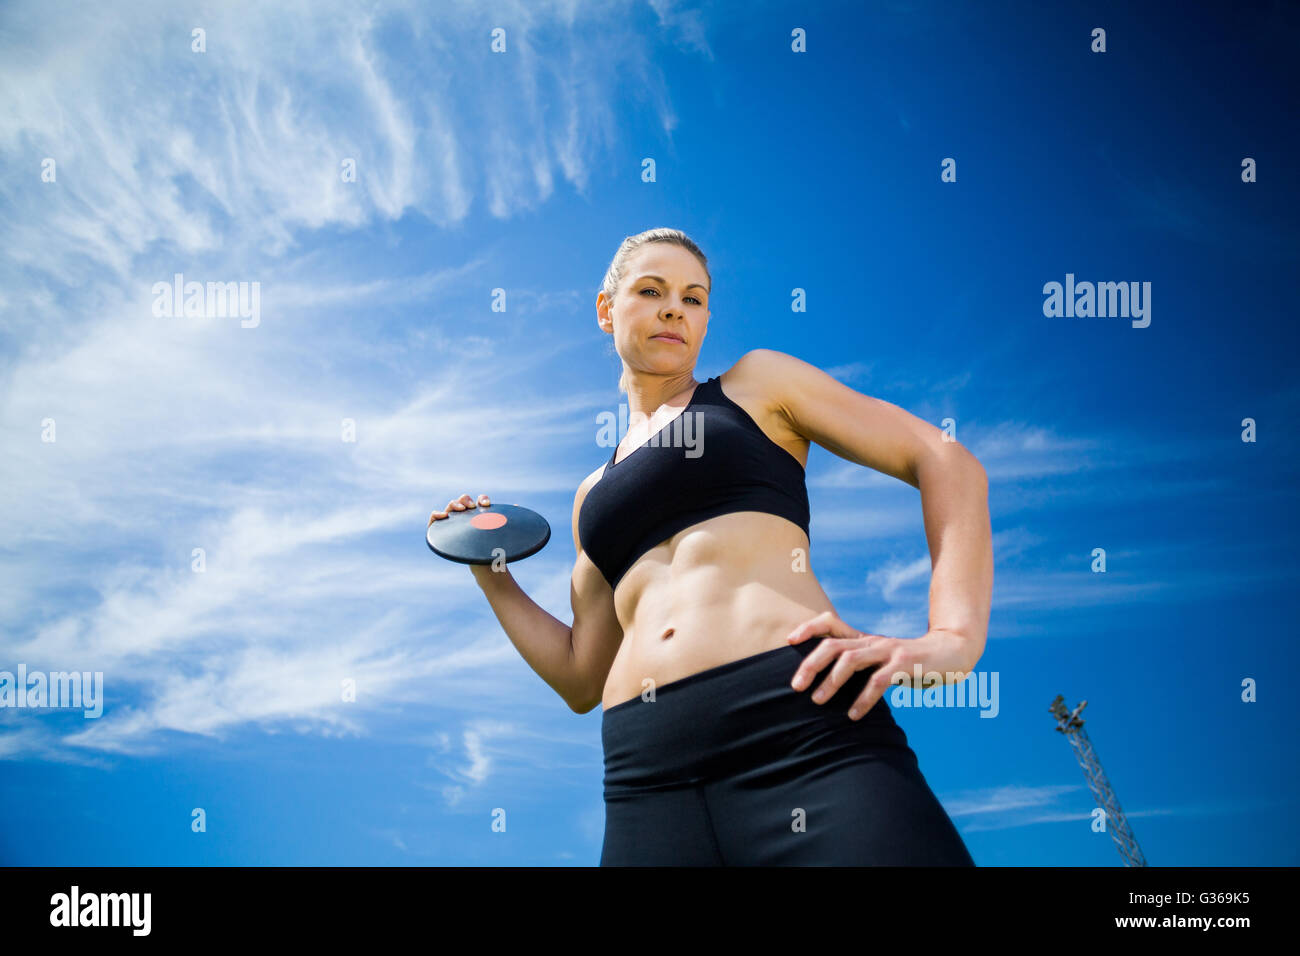 Portrait of female athlete holding a discus Stock Photo